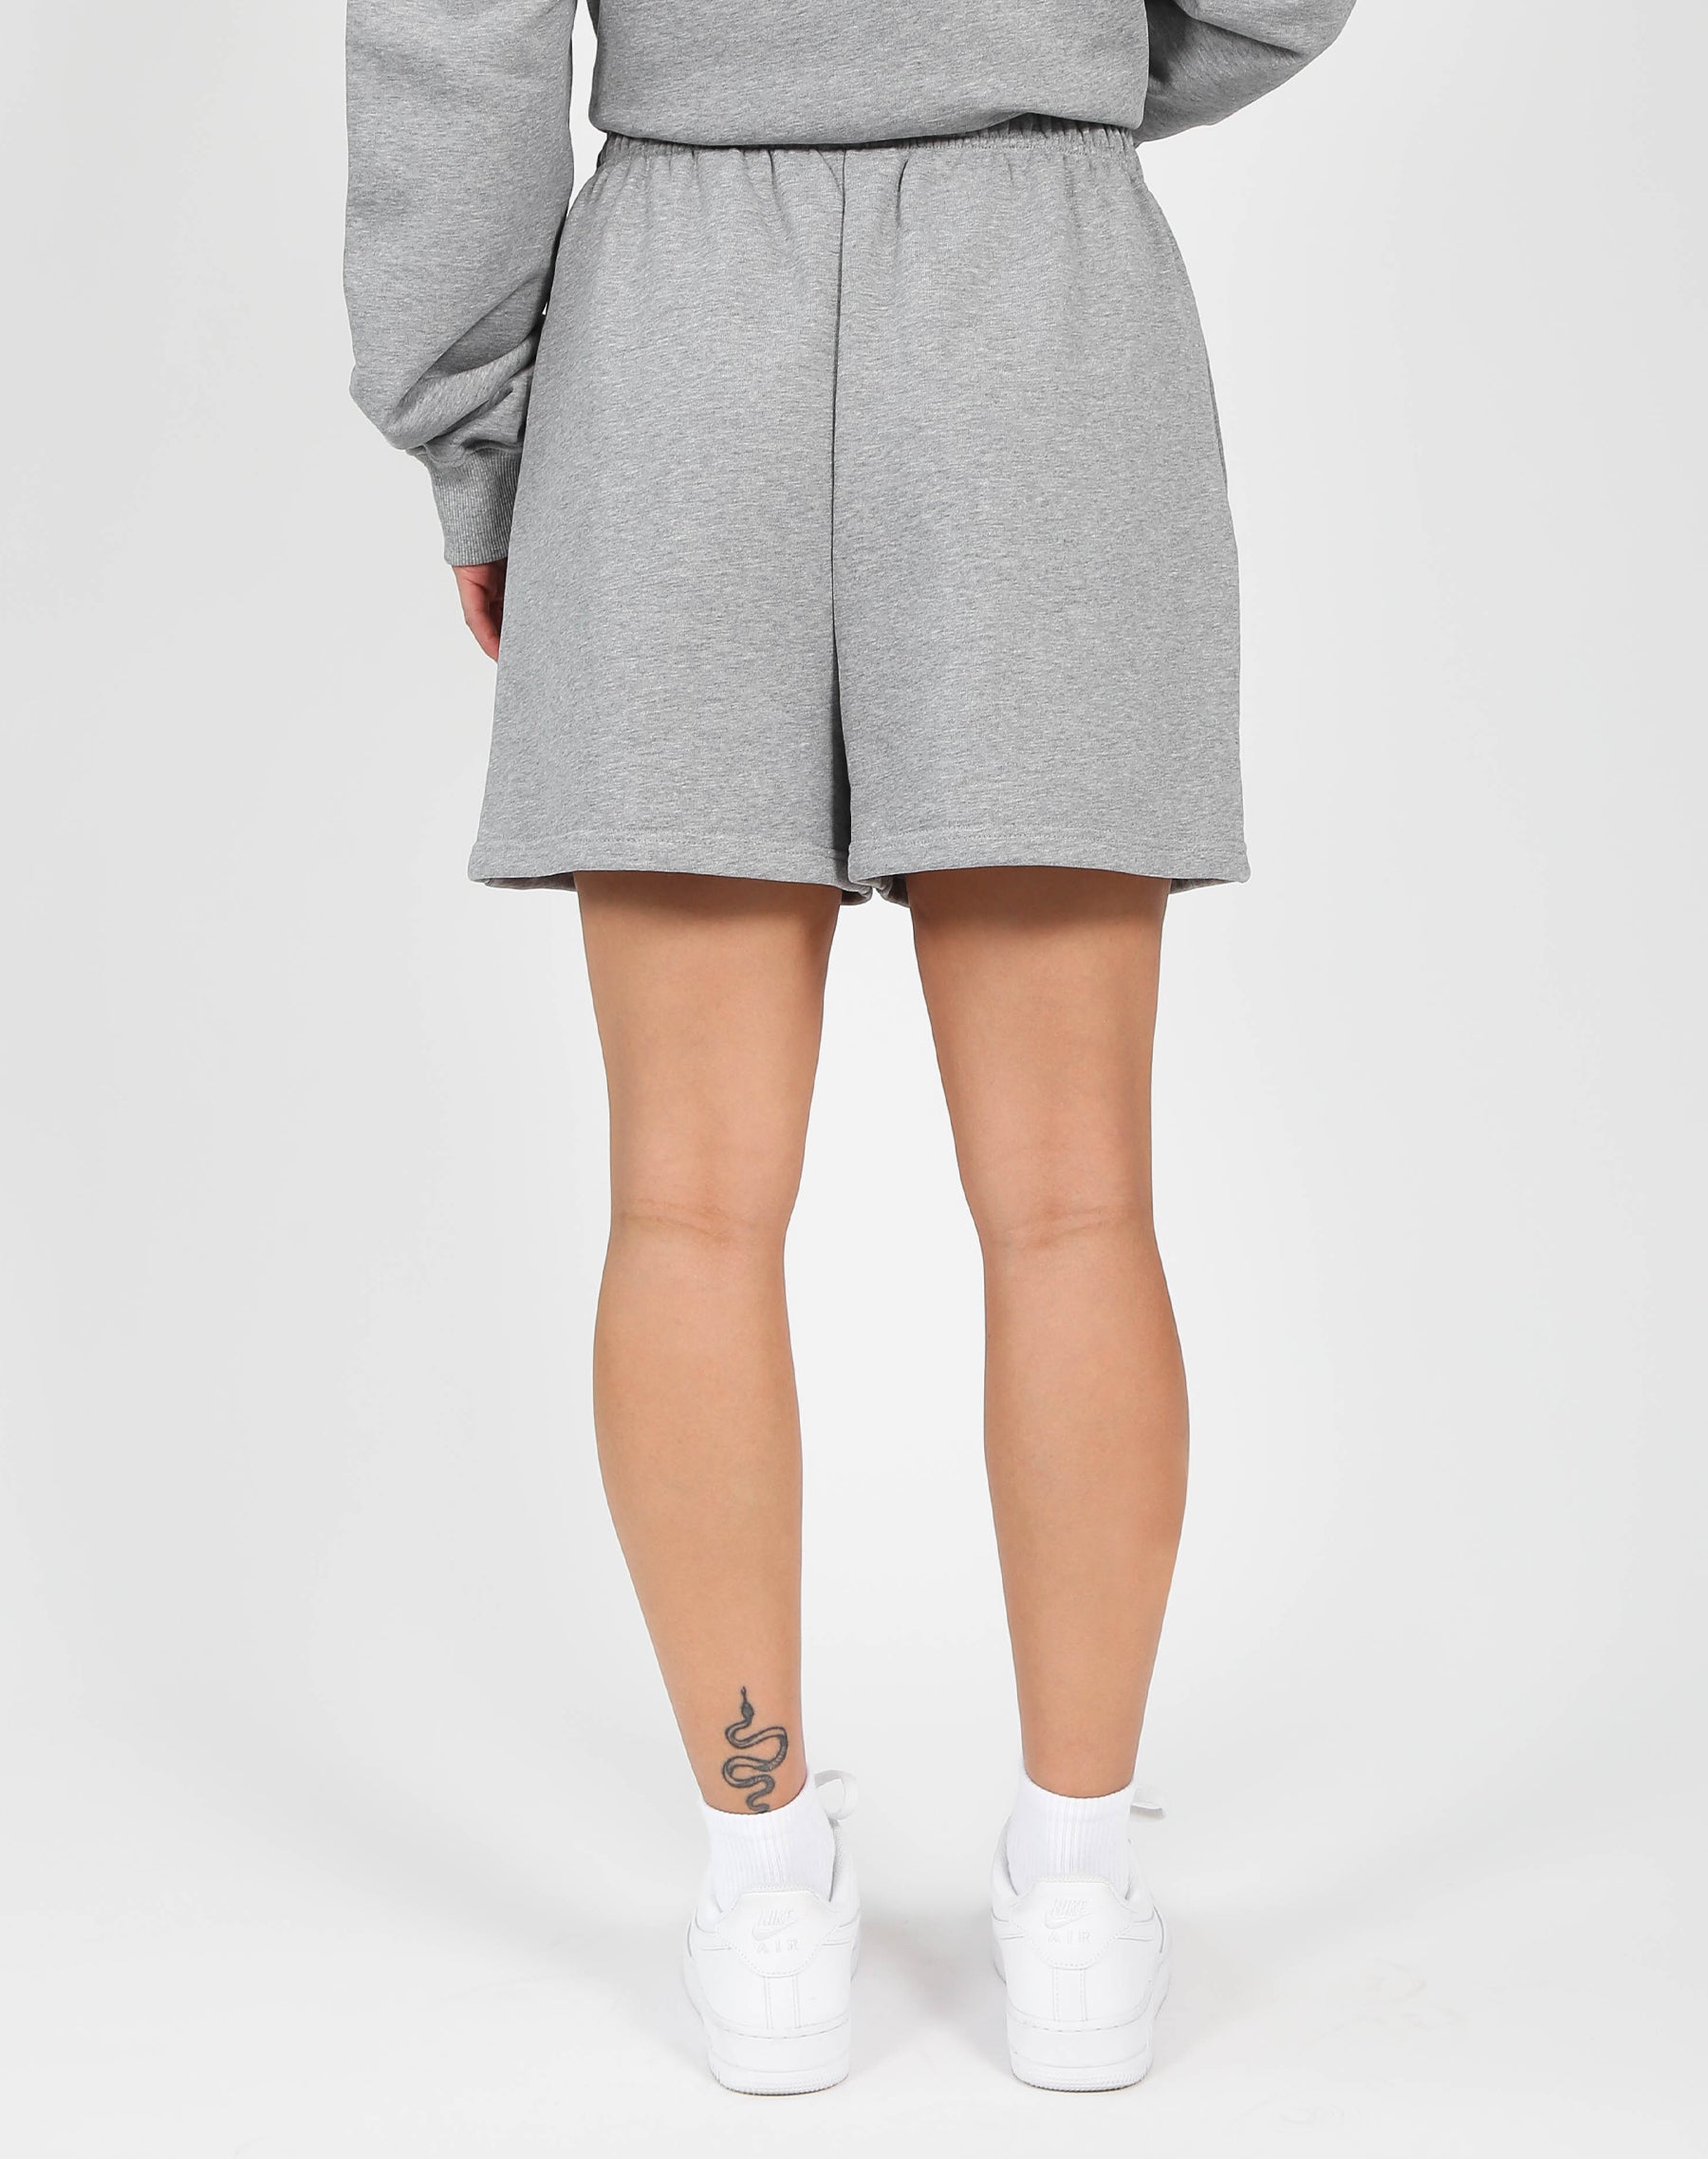 The Best Friend Shorty | Classic Grey